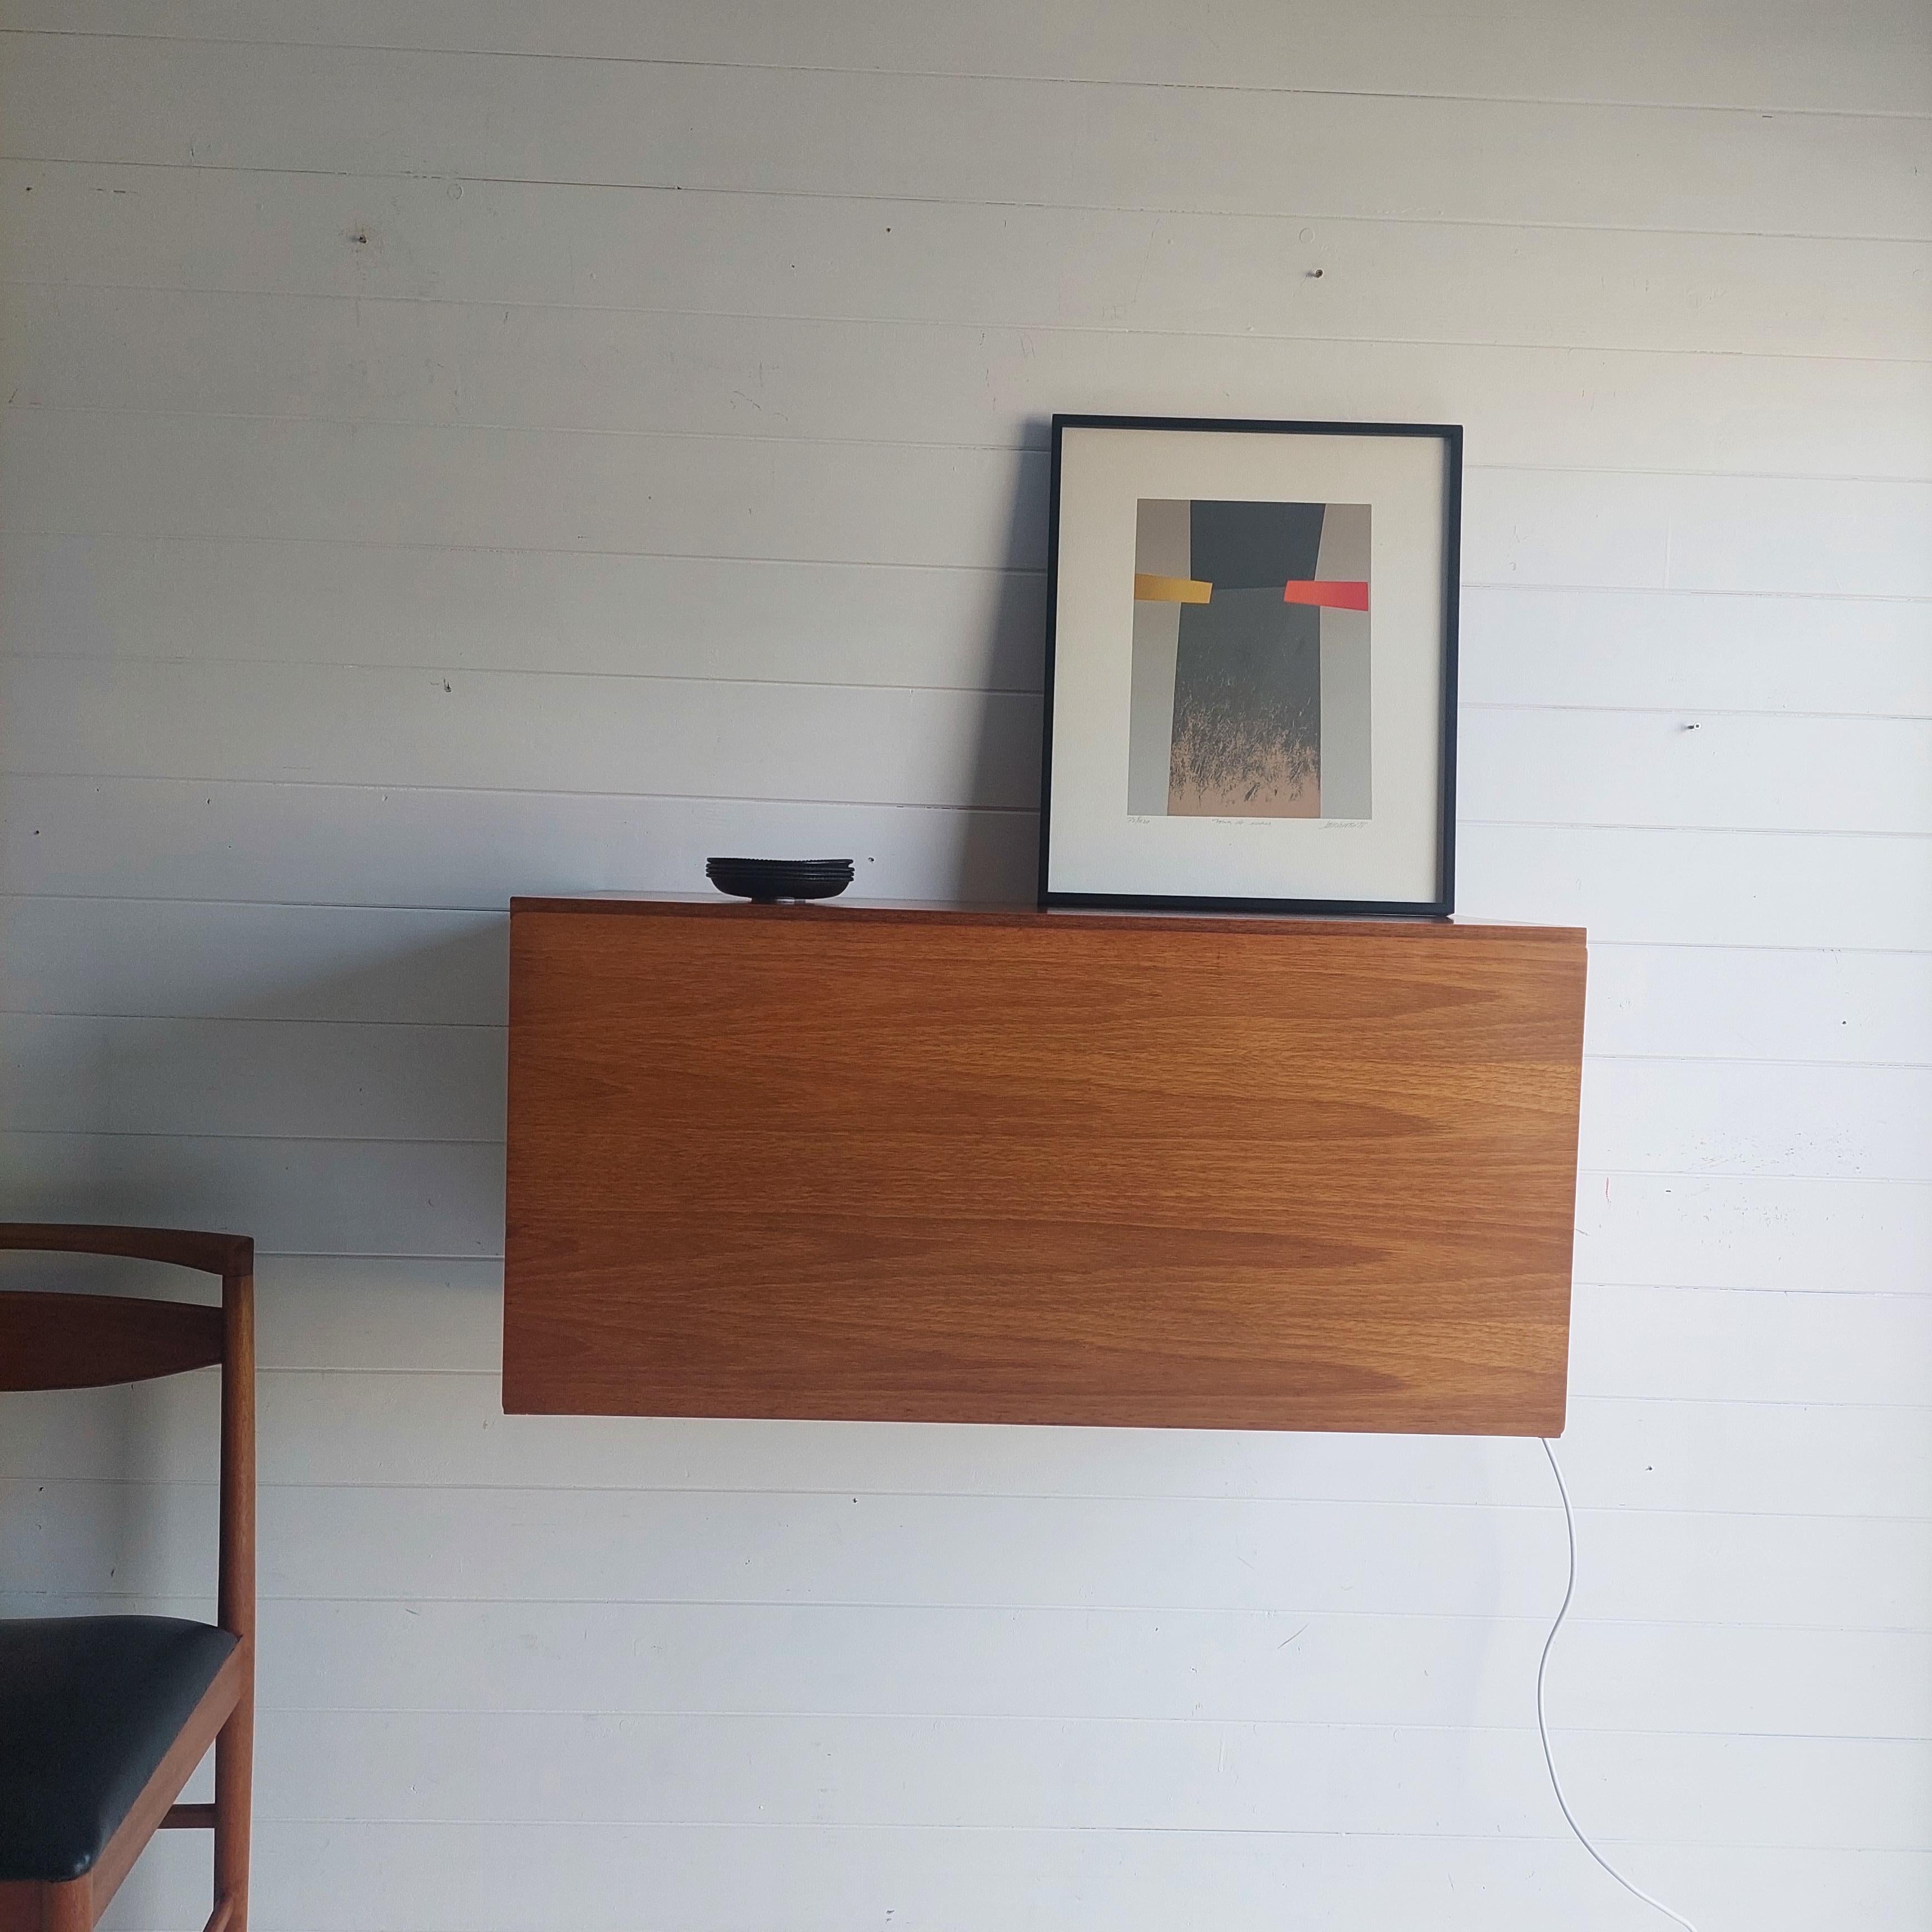 A Beaver & Tapley illuminated floating wall mounted desk storage unit, from their ’33’ range. 
Beaver & Tapley pioneered wall fixed floating units that did away with supporting frameworks. 
Designed by the world renowned Robert Heritage.
Very